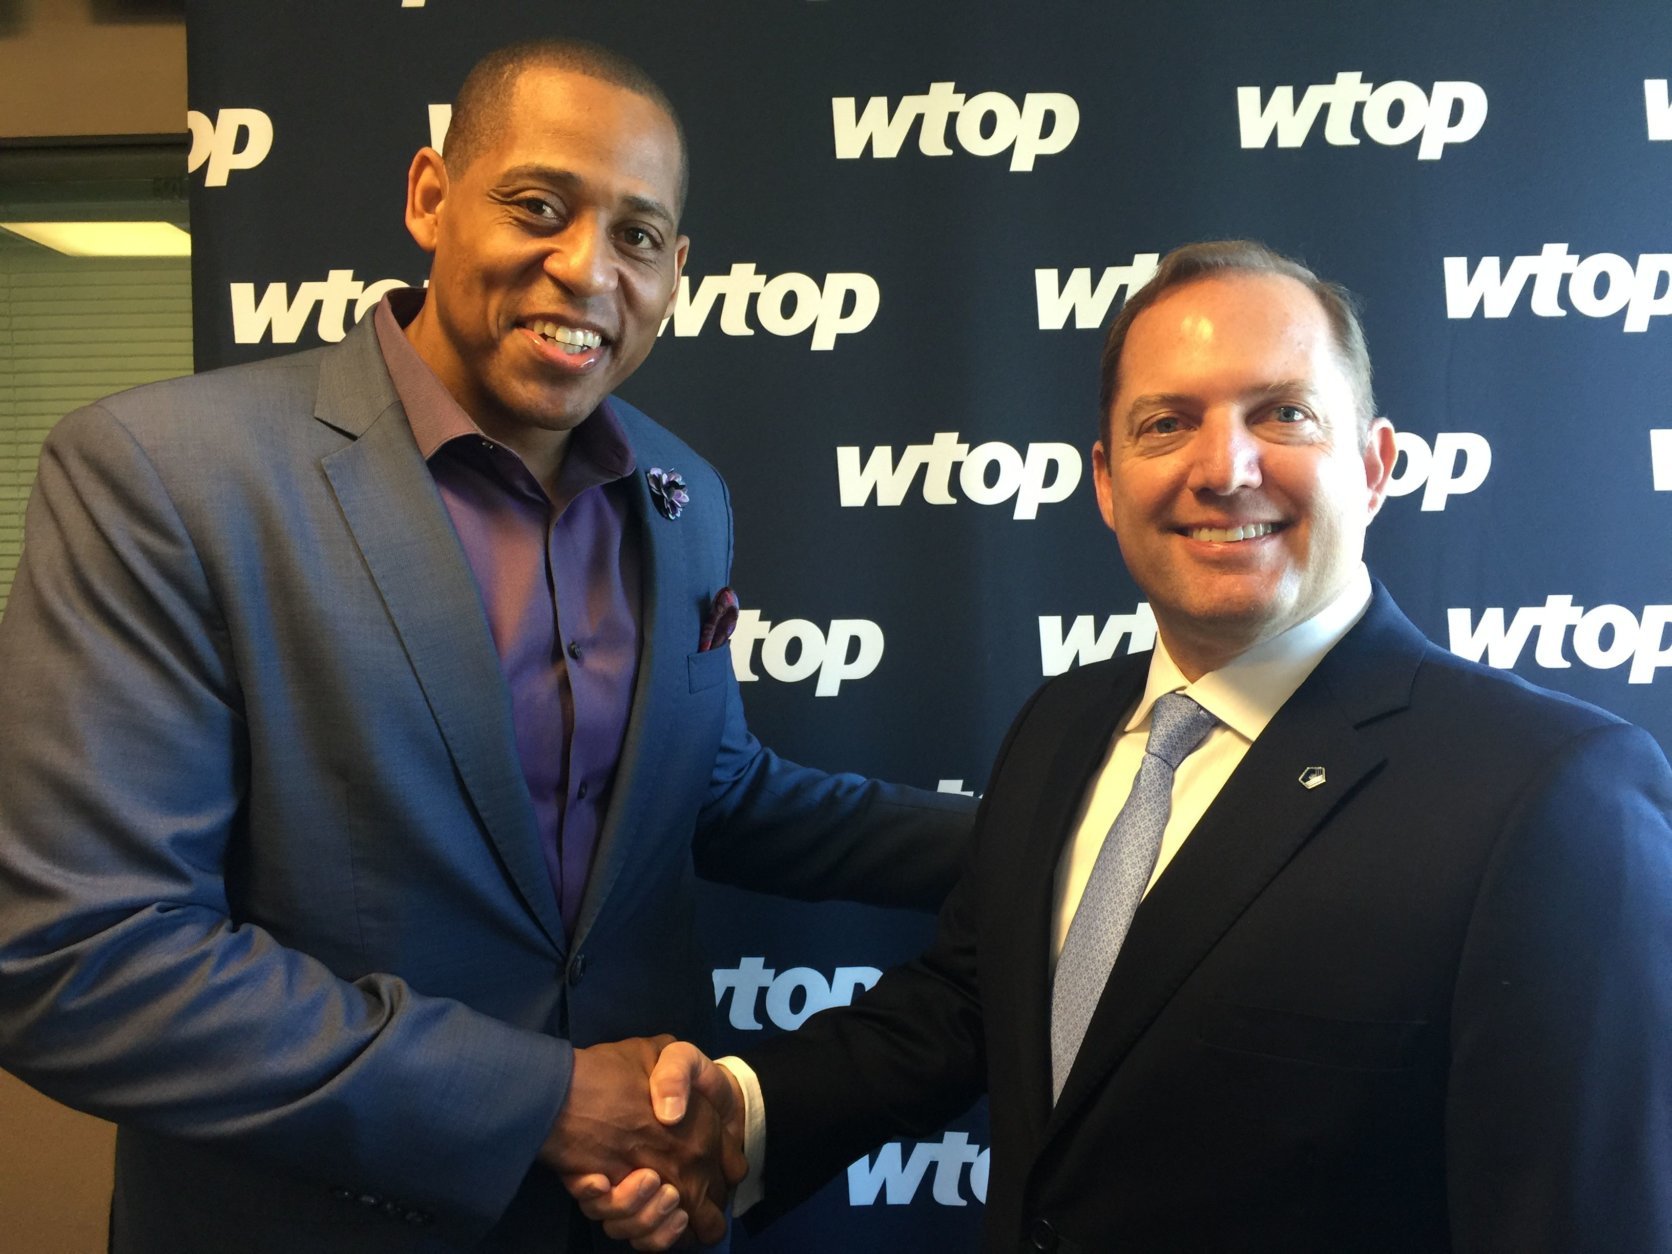 Retired U.S. Army Master Sgt. Cedric King, left, and PenFed Credit Union President and CEO James Schenck visit WTOP to talk about PenFed Foundation donations, what they fund for recipients, and what the contributions mean for military members and their families. (WTOP/Kristi King)

